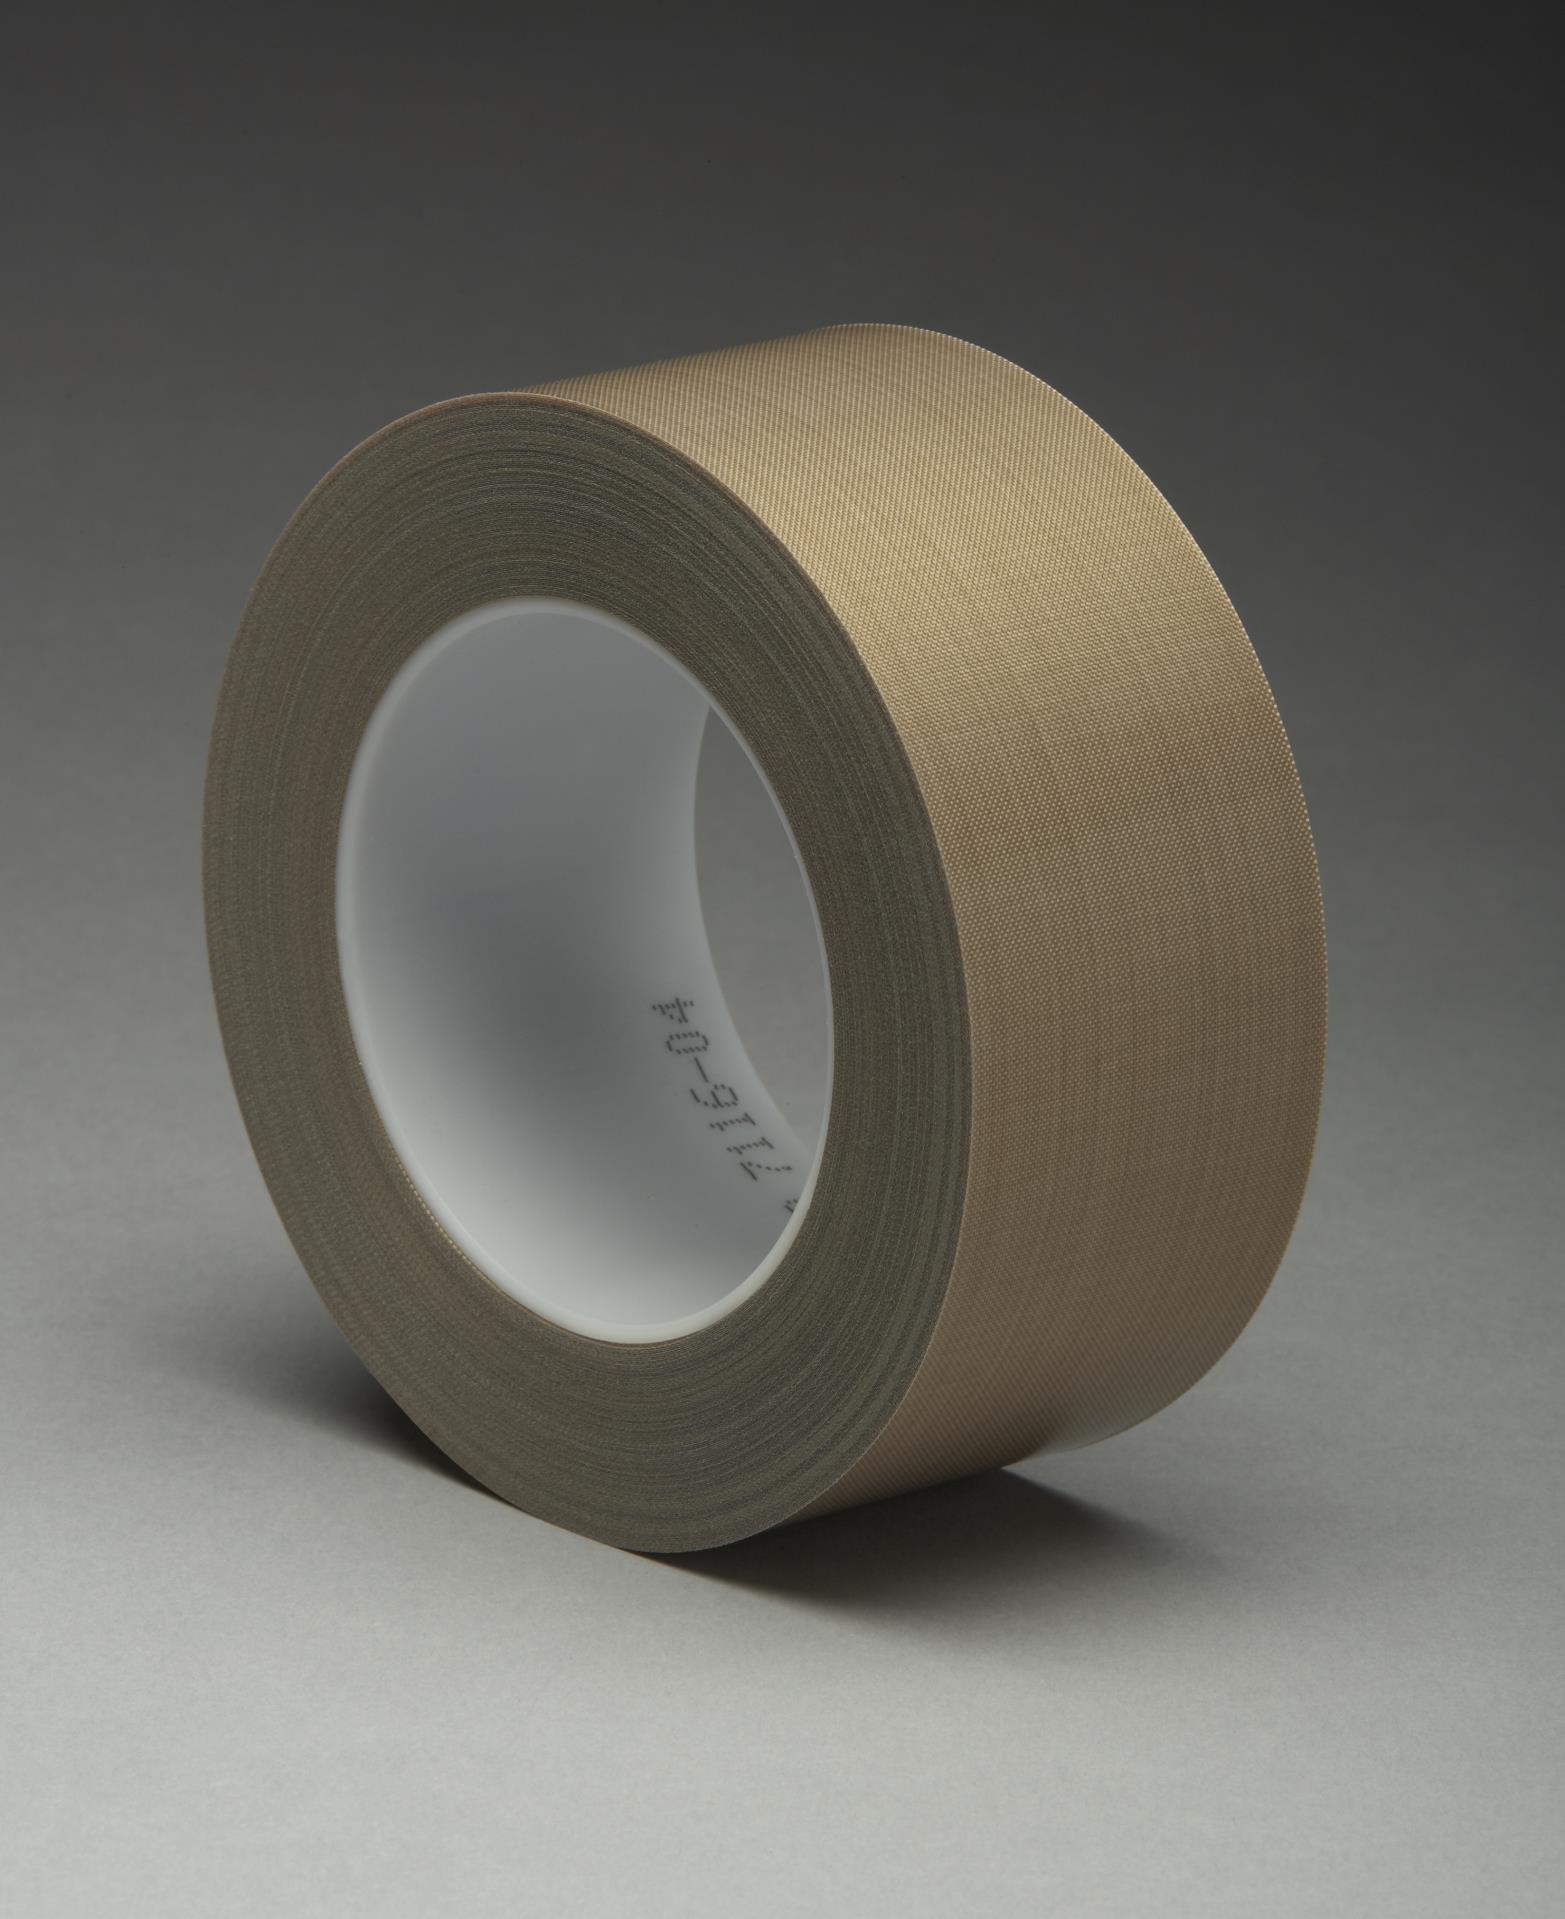 3M 361 4 x 6-25 White Glass Cloth/Silicone Adhesive Electrical Tape 3M 361 4 x 6-25 -65 degrees F to 450 degrees F Pack of 25 Pack of 25 4 Width 6 Length 6 Length 4 Width 